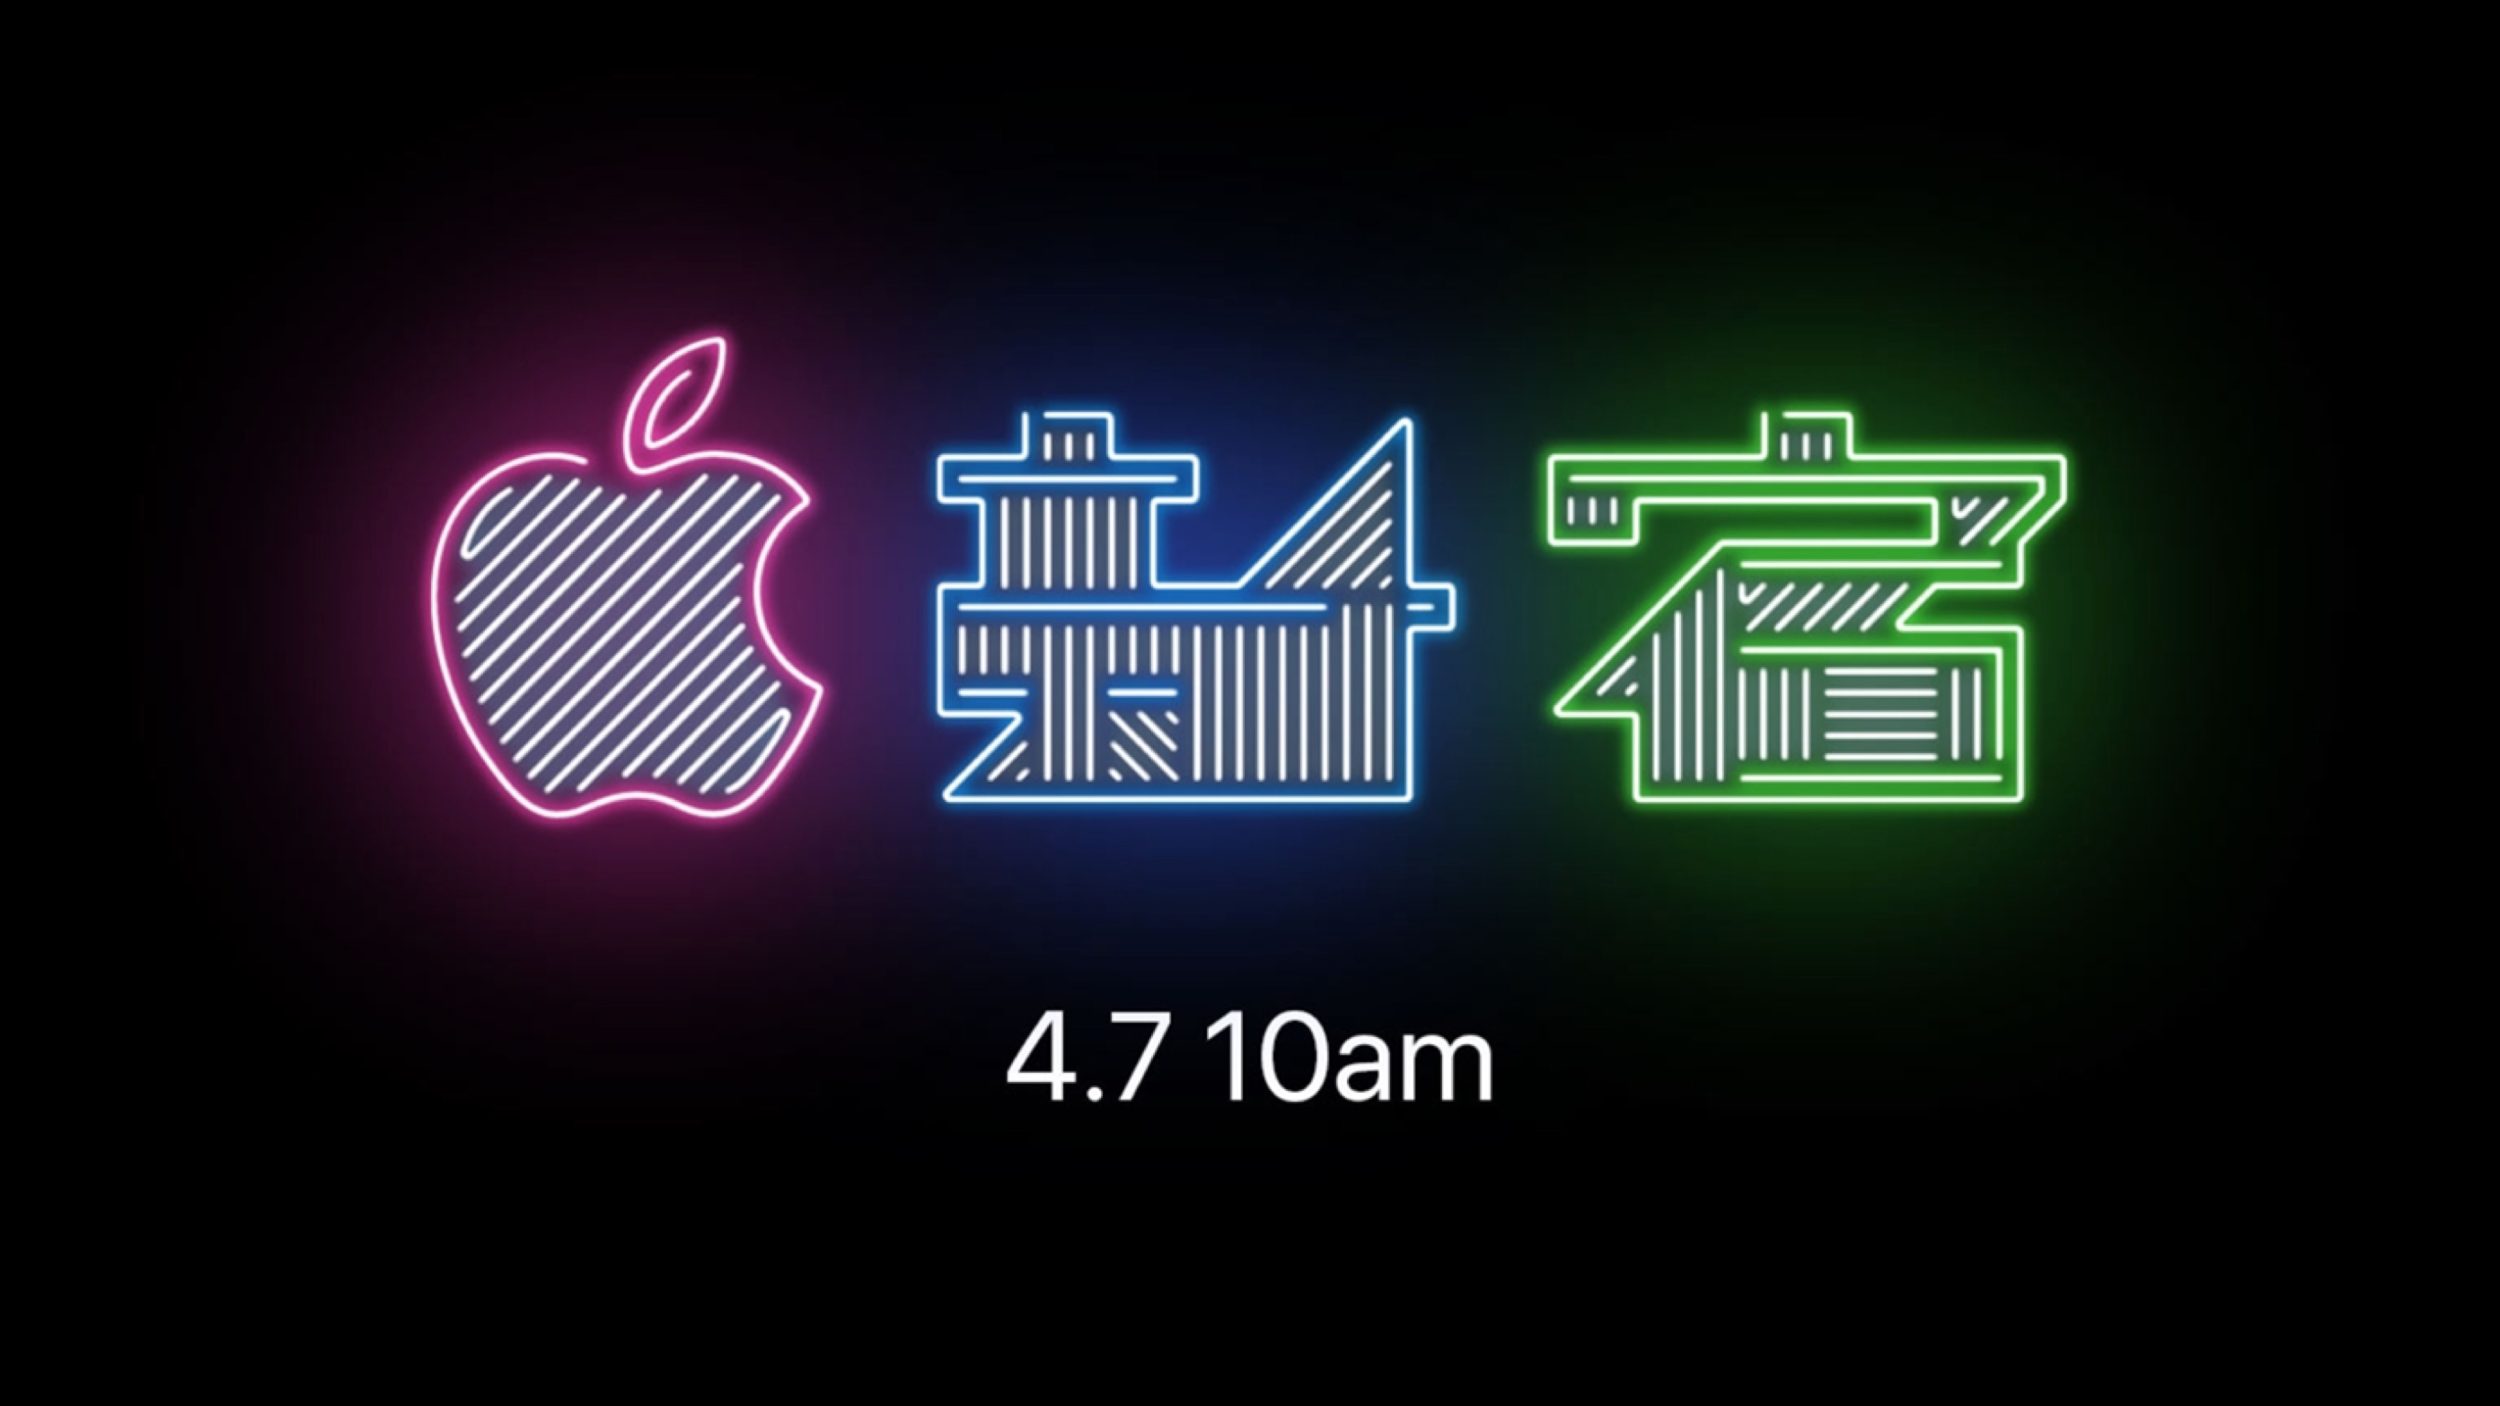 Apple Sets Grand Opening of New Shinjuku Retail Store in Tokyo for April 7th